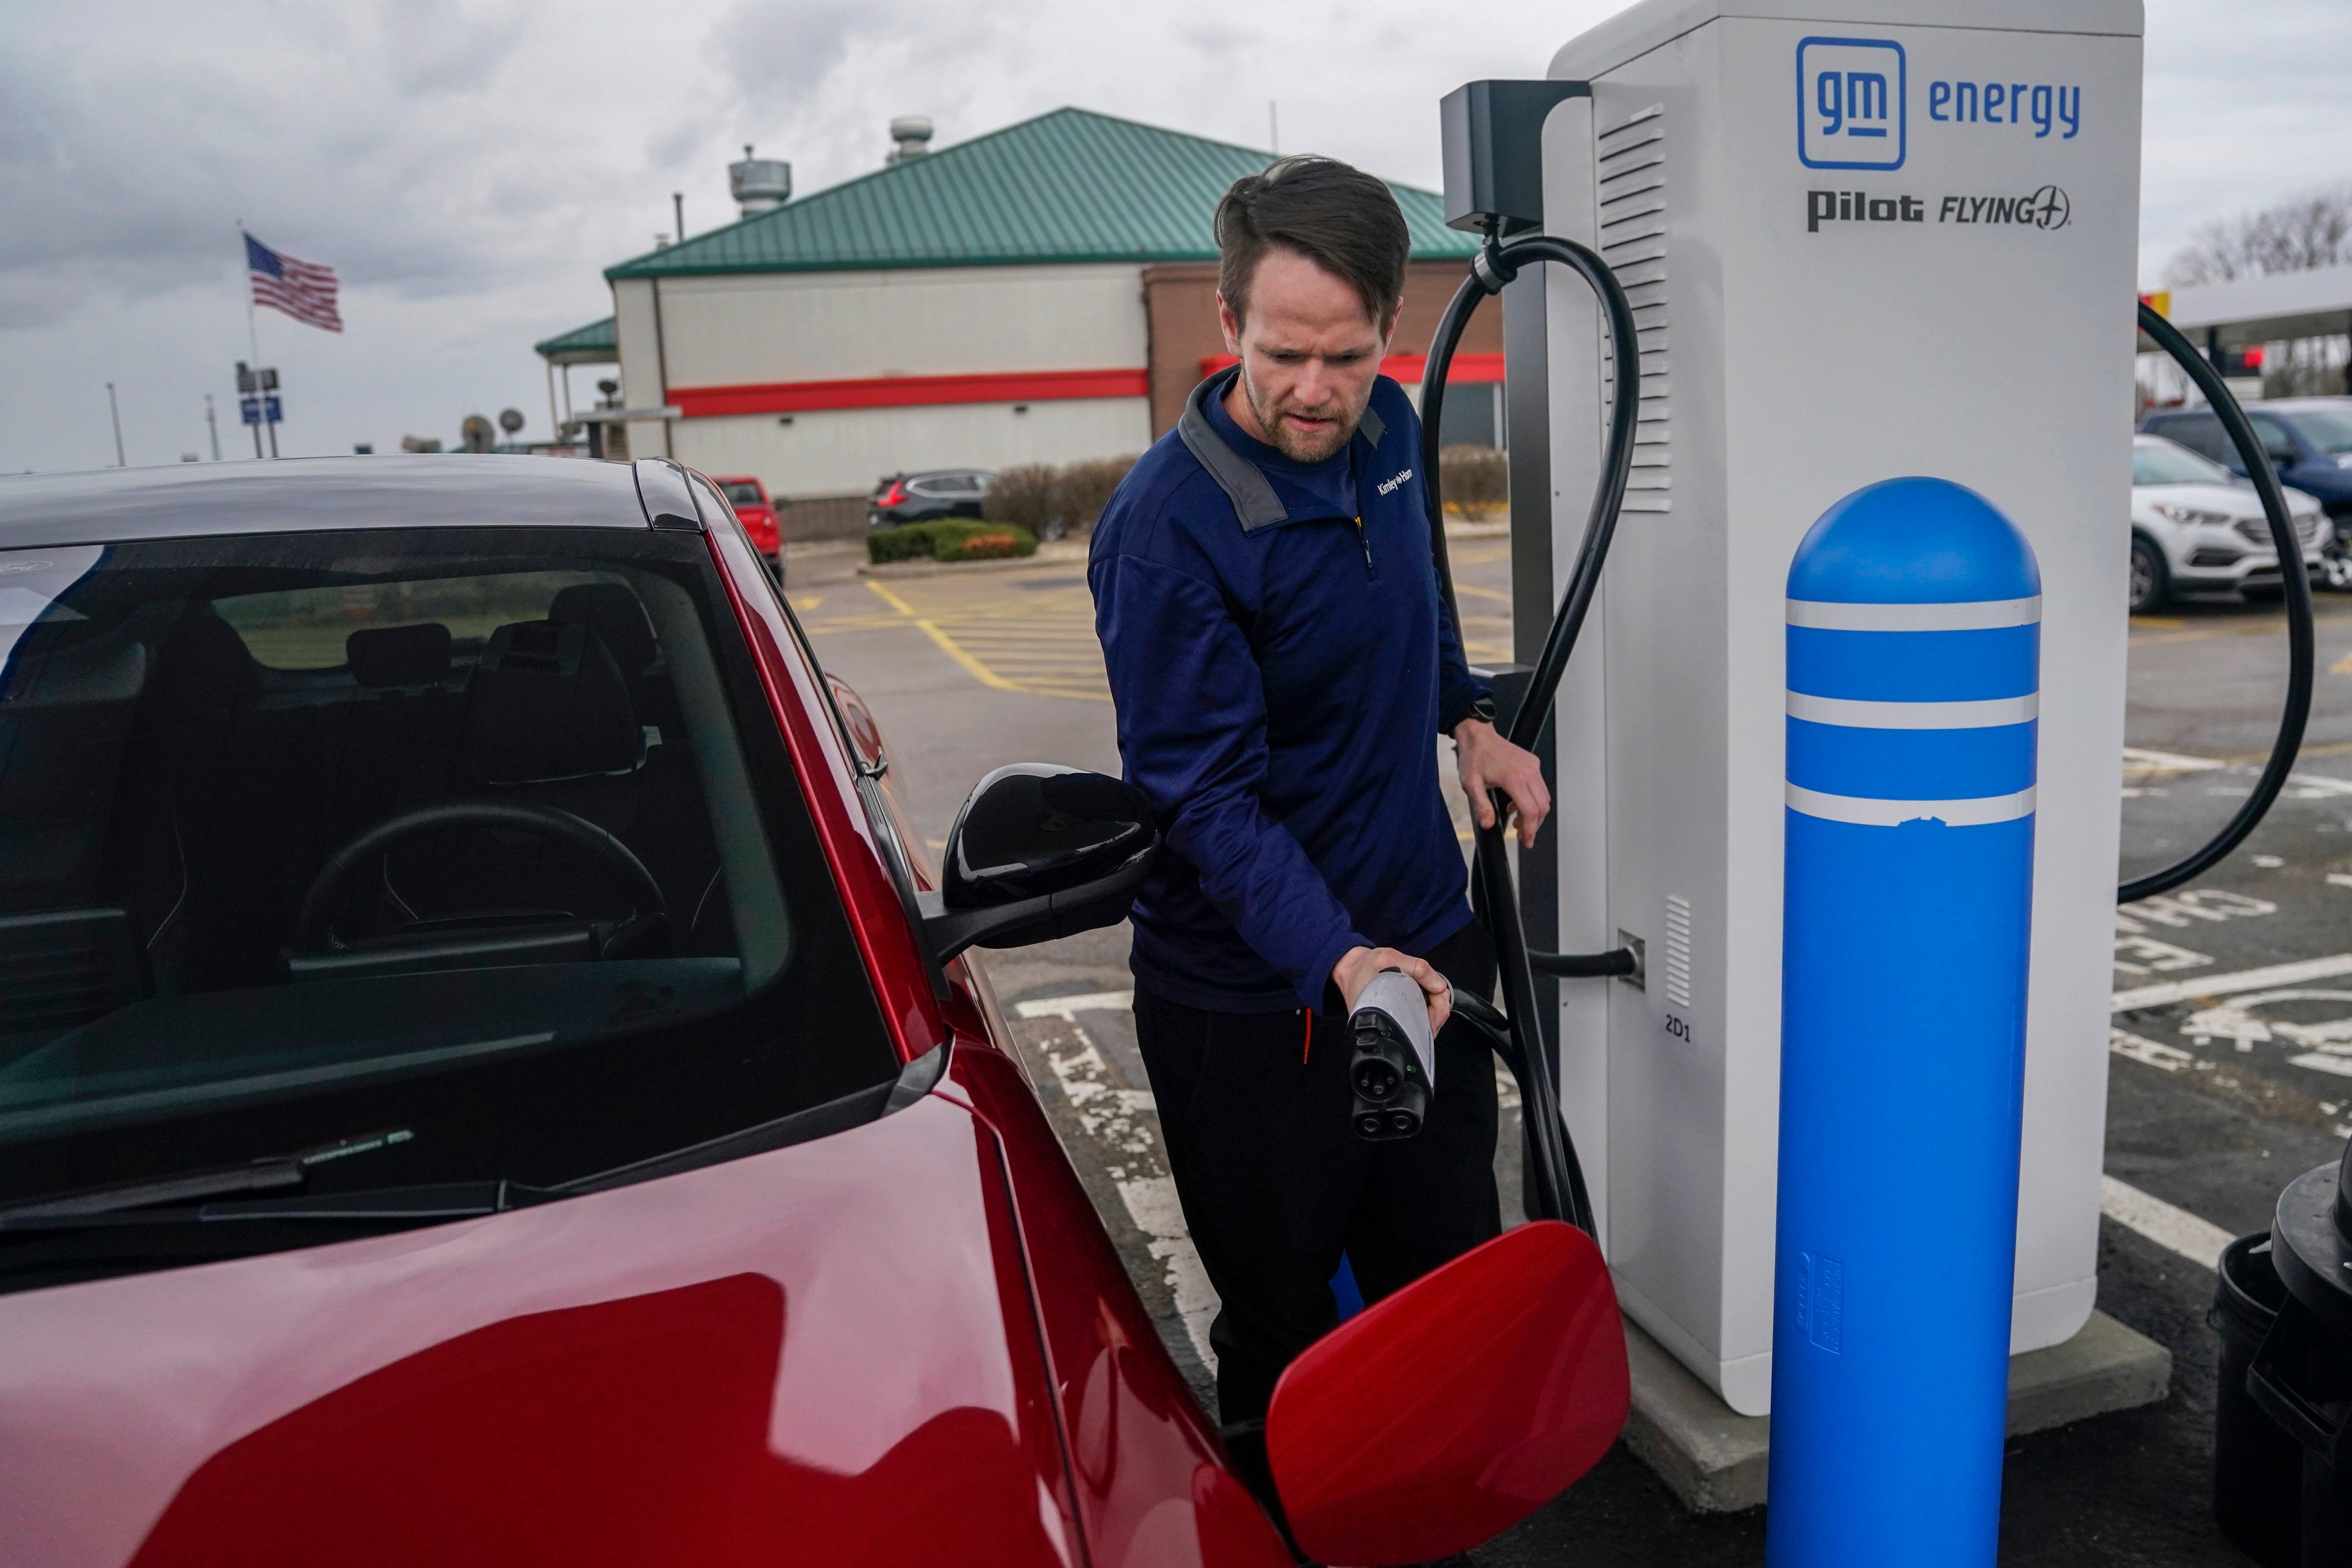 An electric car owner recharges his vehicle at a charging station in London, Ohio, the US on March 8. If EV pricing in the US can approach the level of China’s, demand will mushroom. Photo: AP